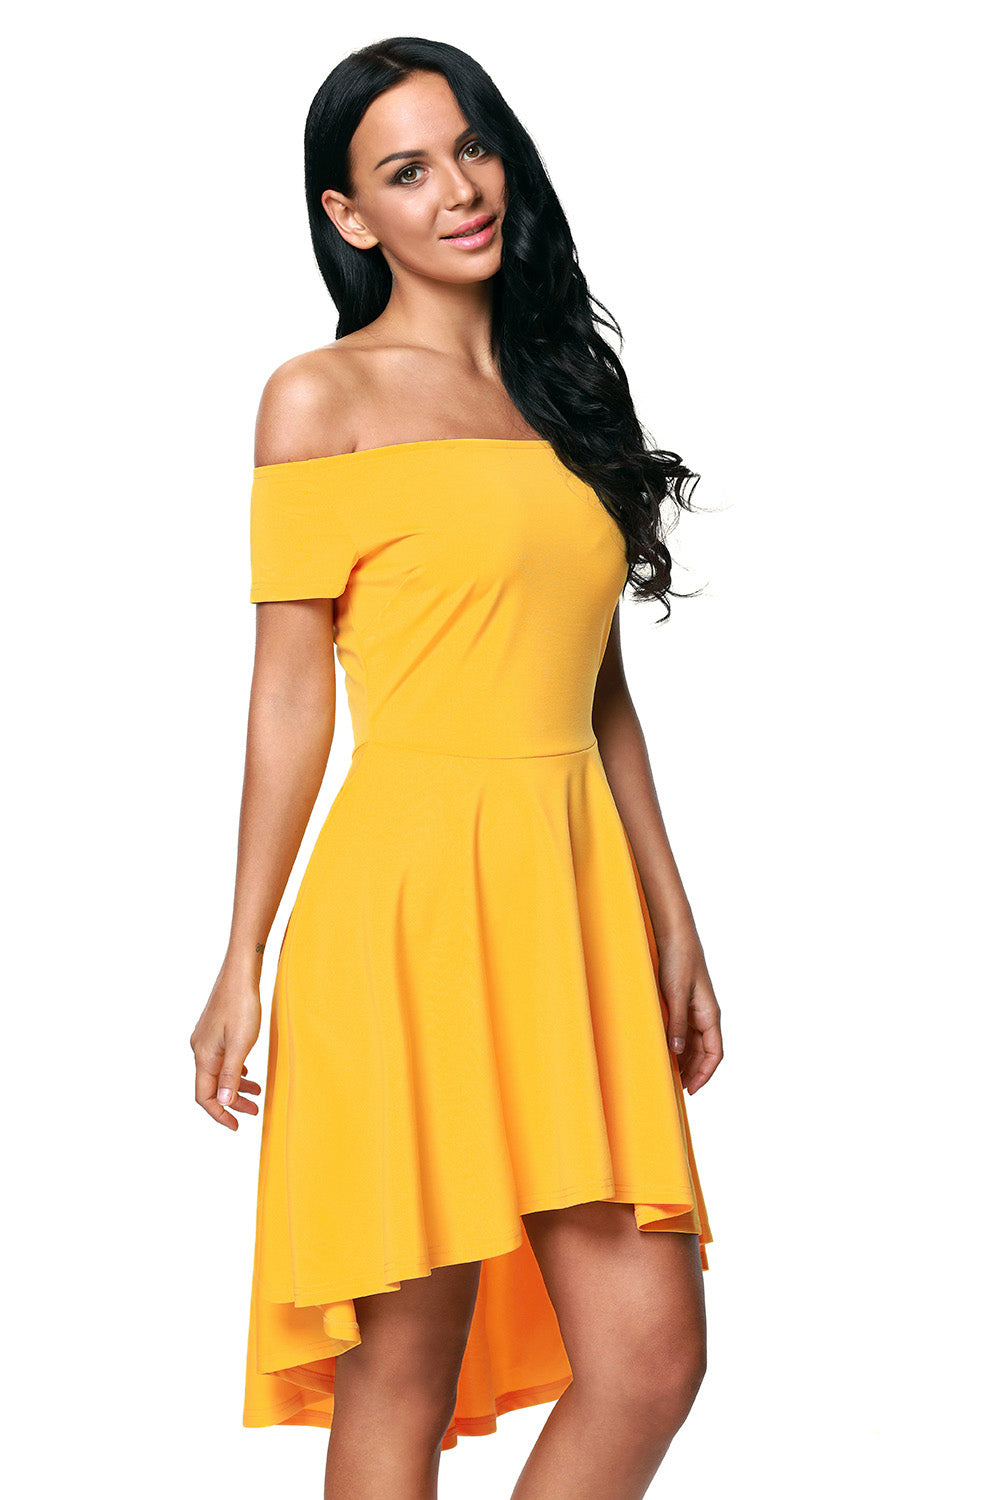 All The Rage Yellow Skater Dress